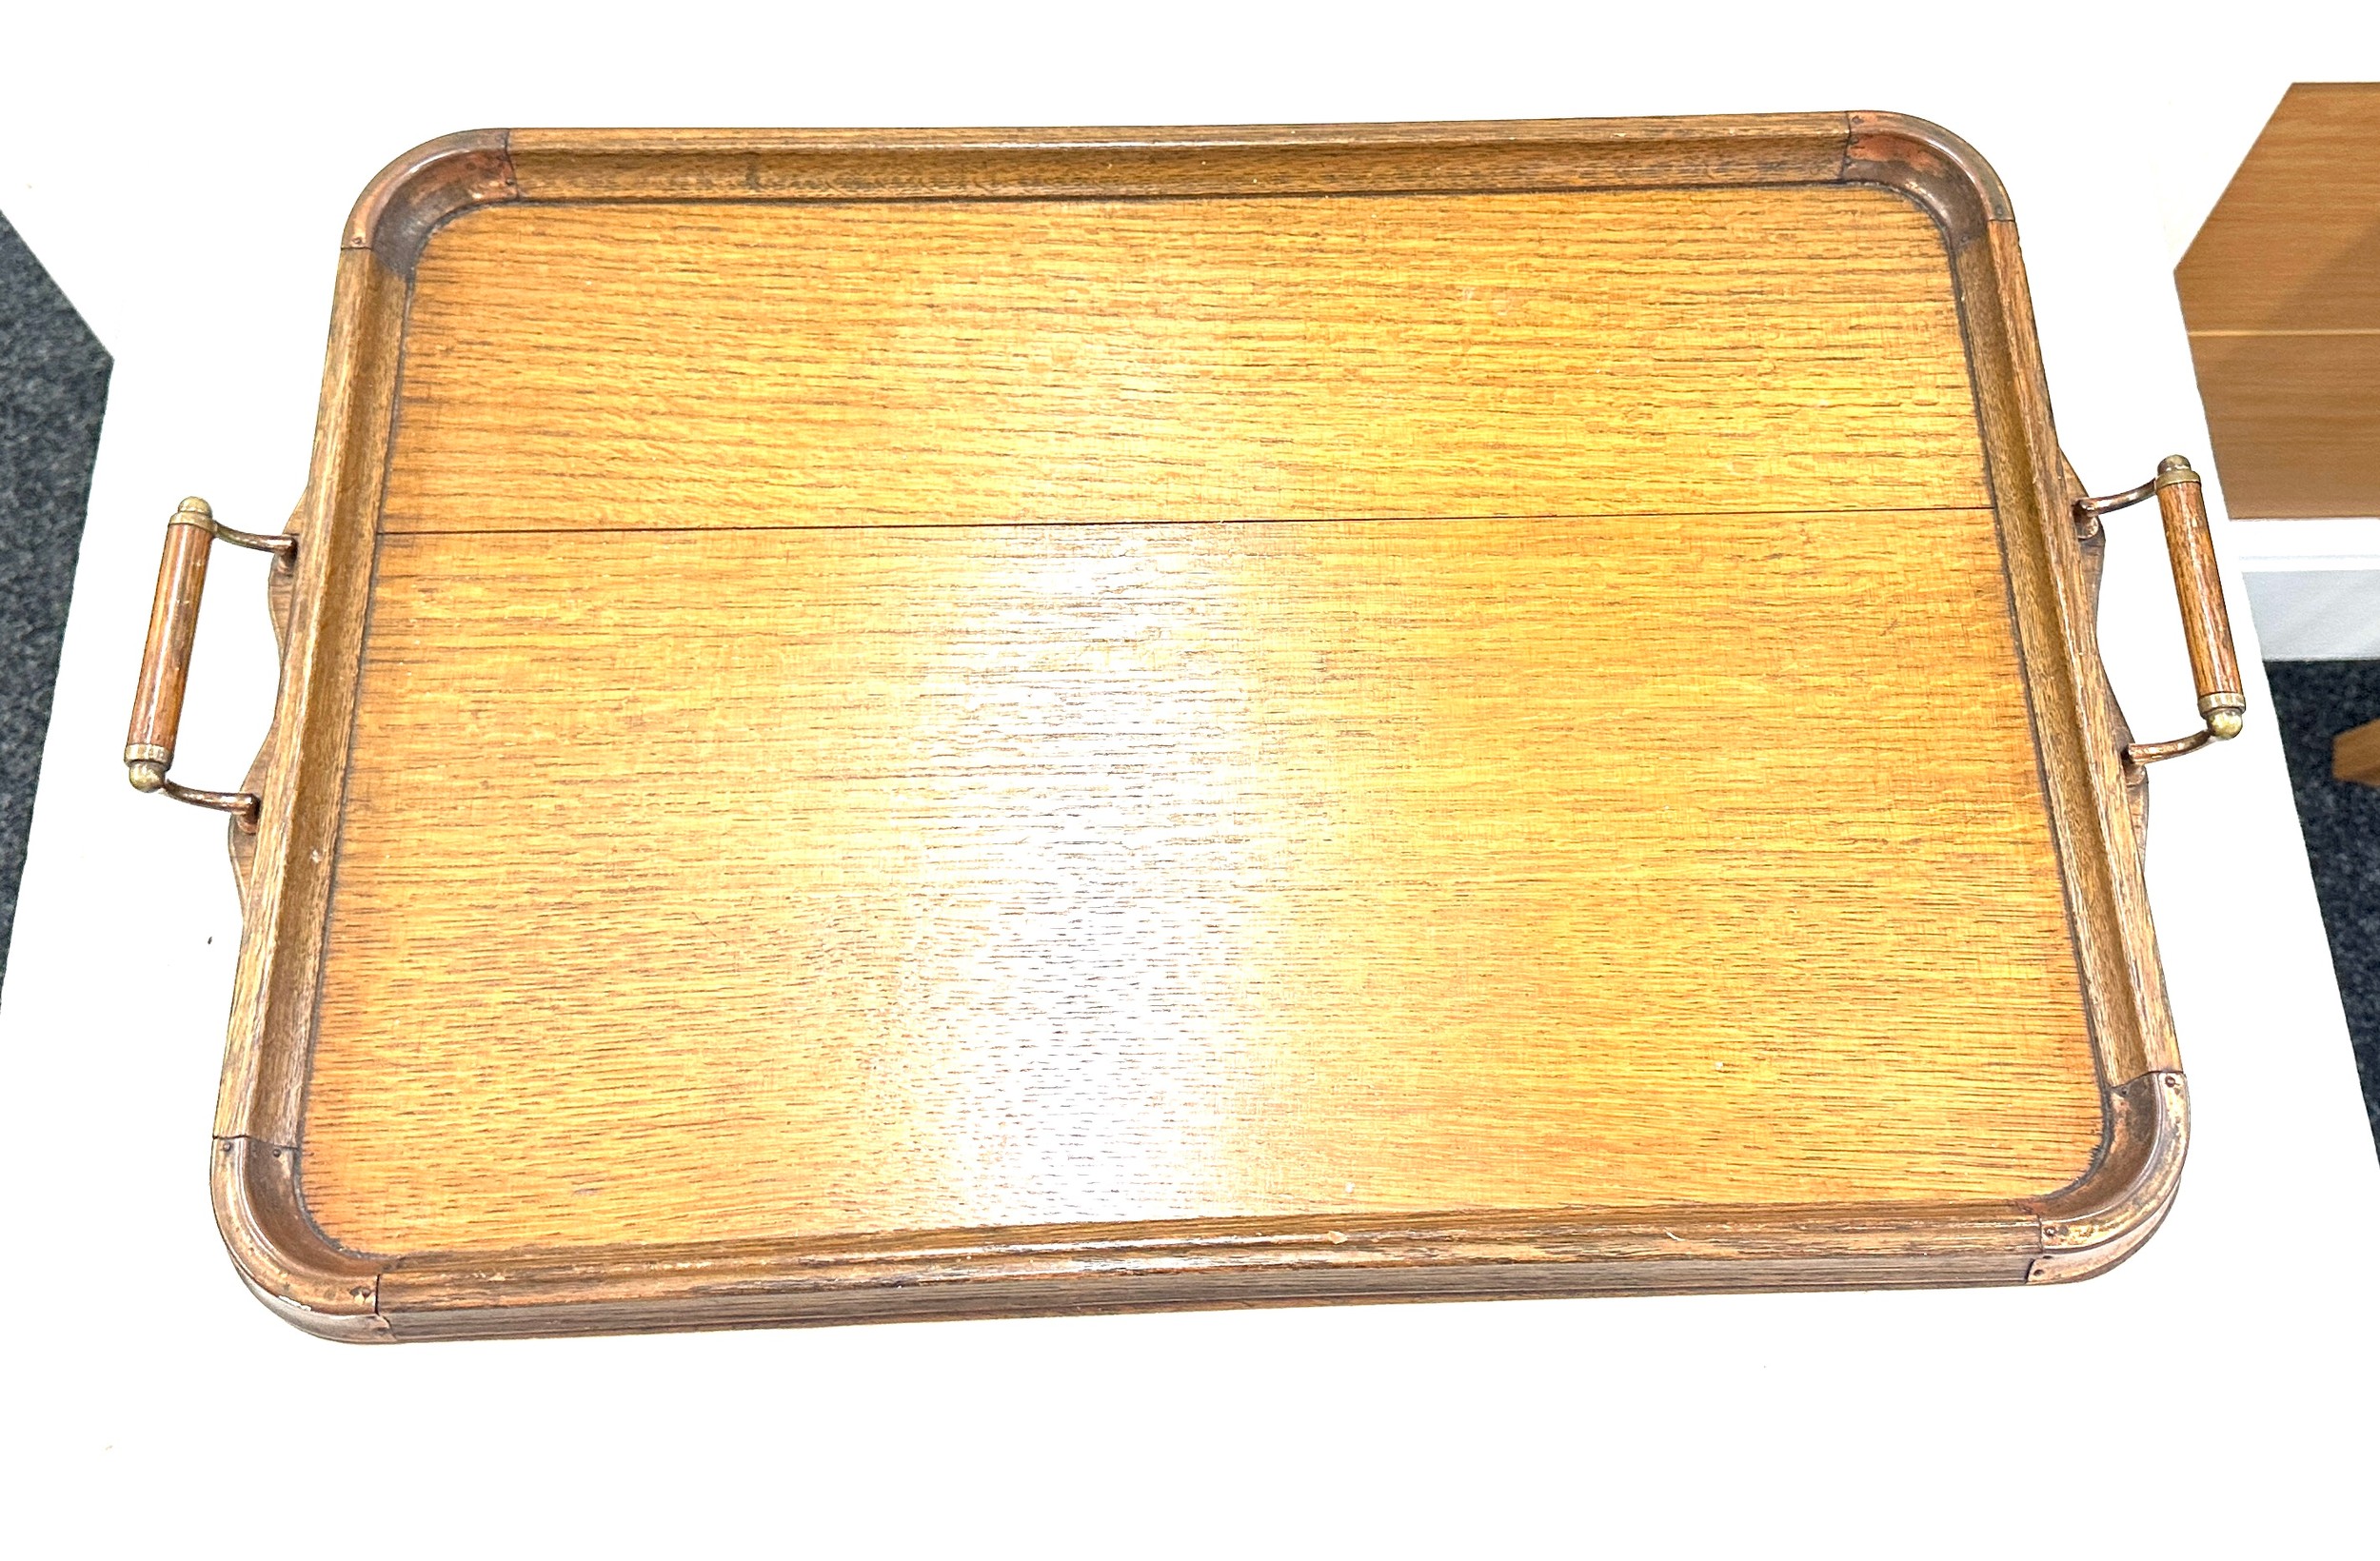 Antique 2 handled copper bound serving tray 23 inches wide by 16.5 inches